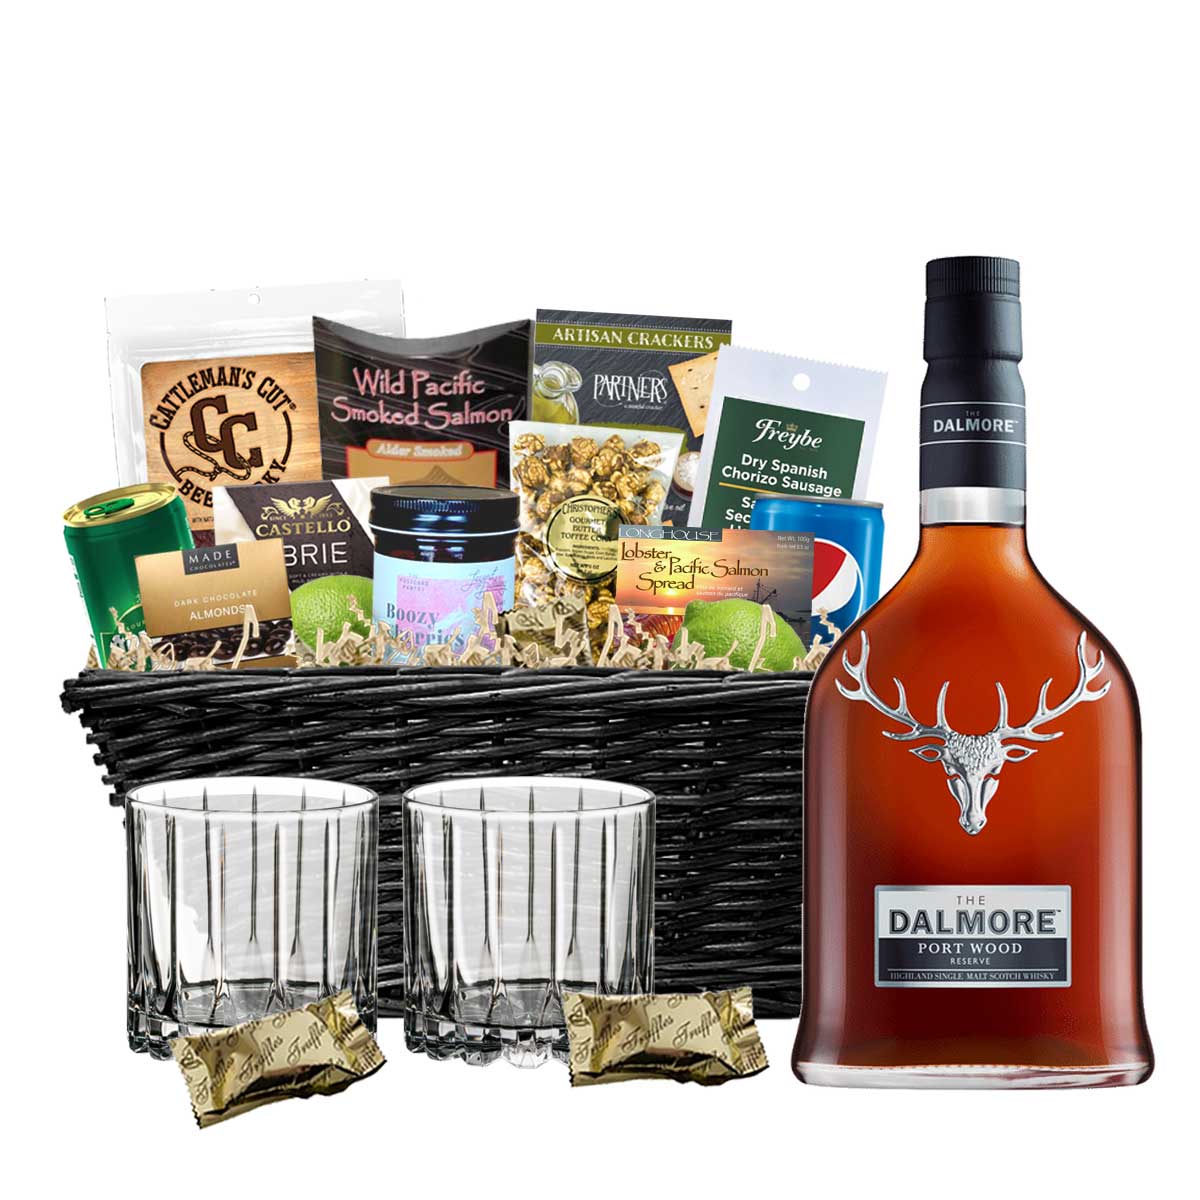 TAG Liquor Stores BC - Dalmore Port Wood Reserve Scotch Whisky 750ml Gift Basket